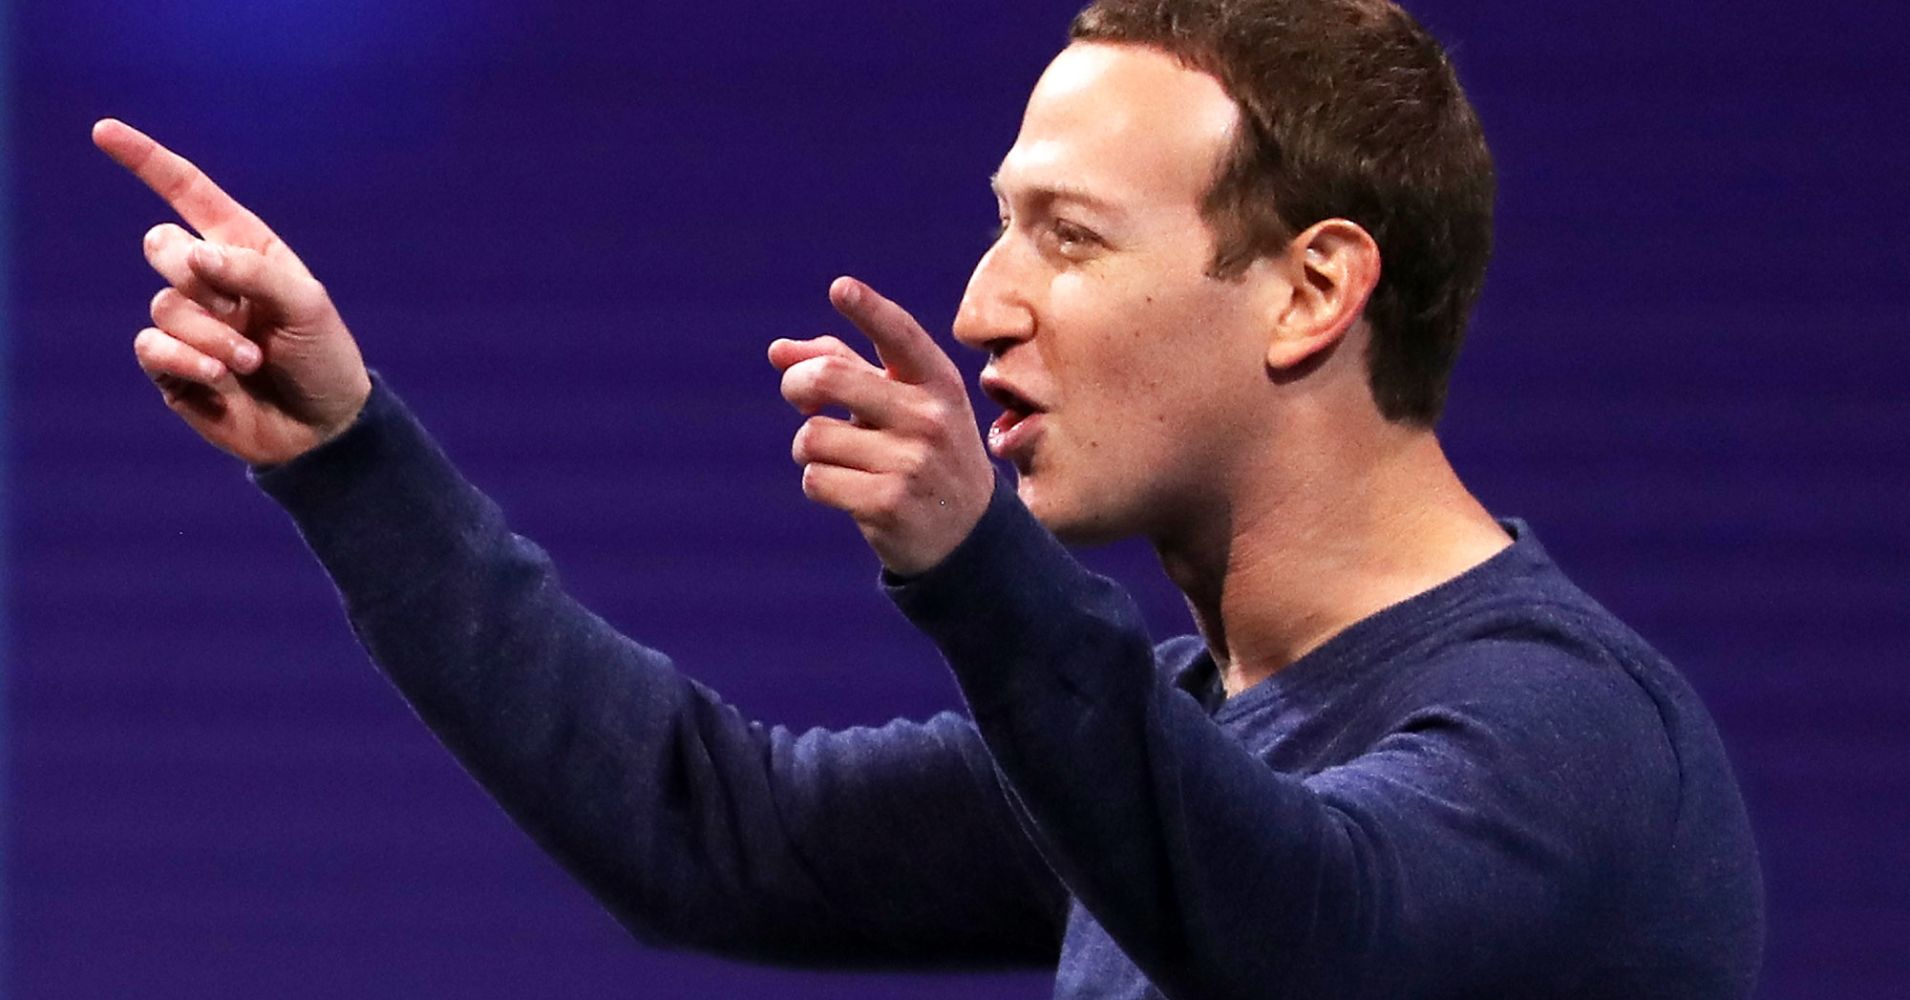 Facebook is soaring on earnings. Three experts weigh in